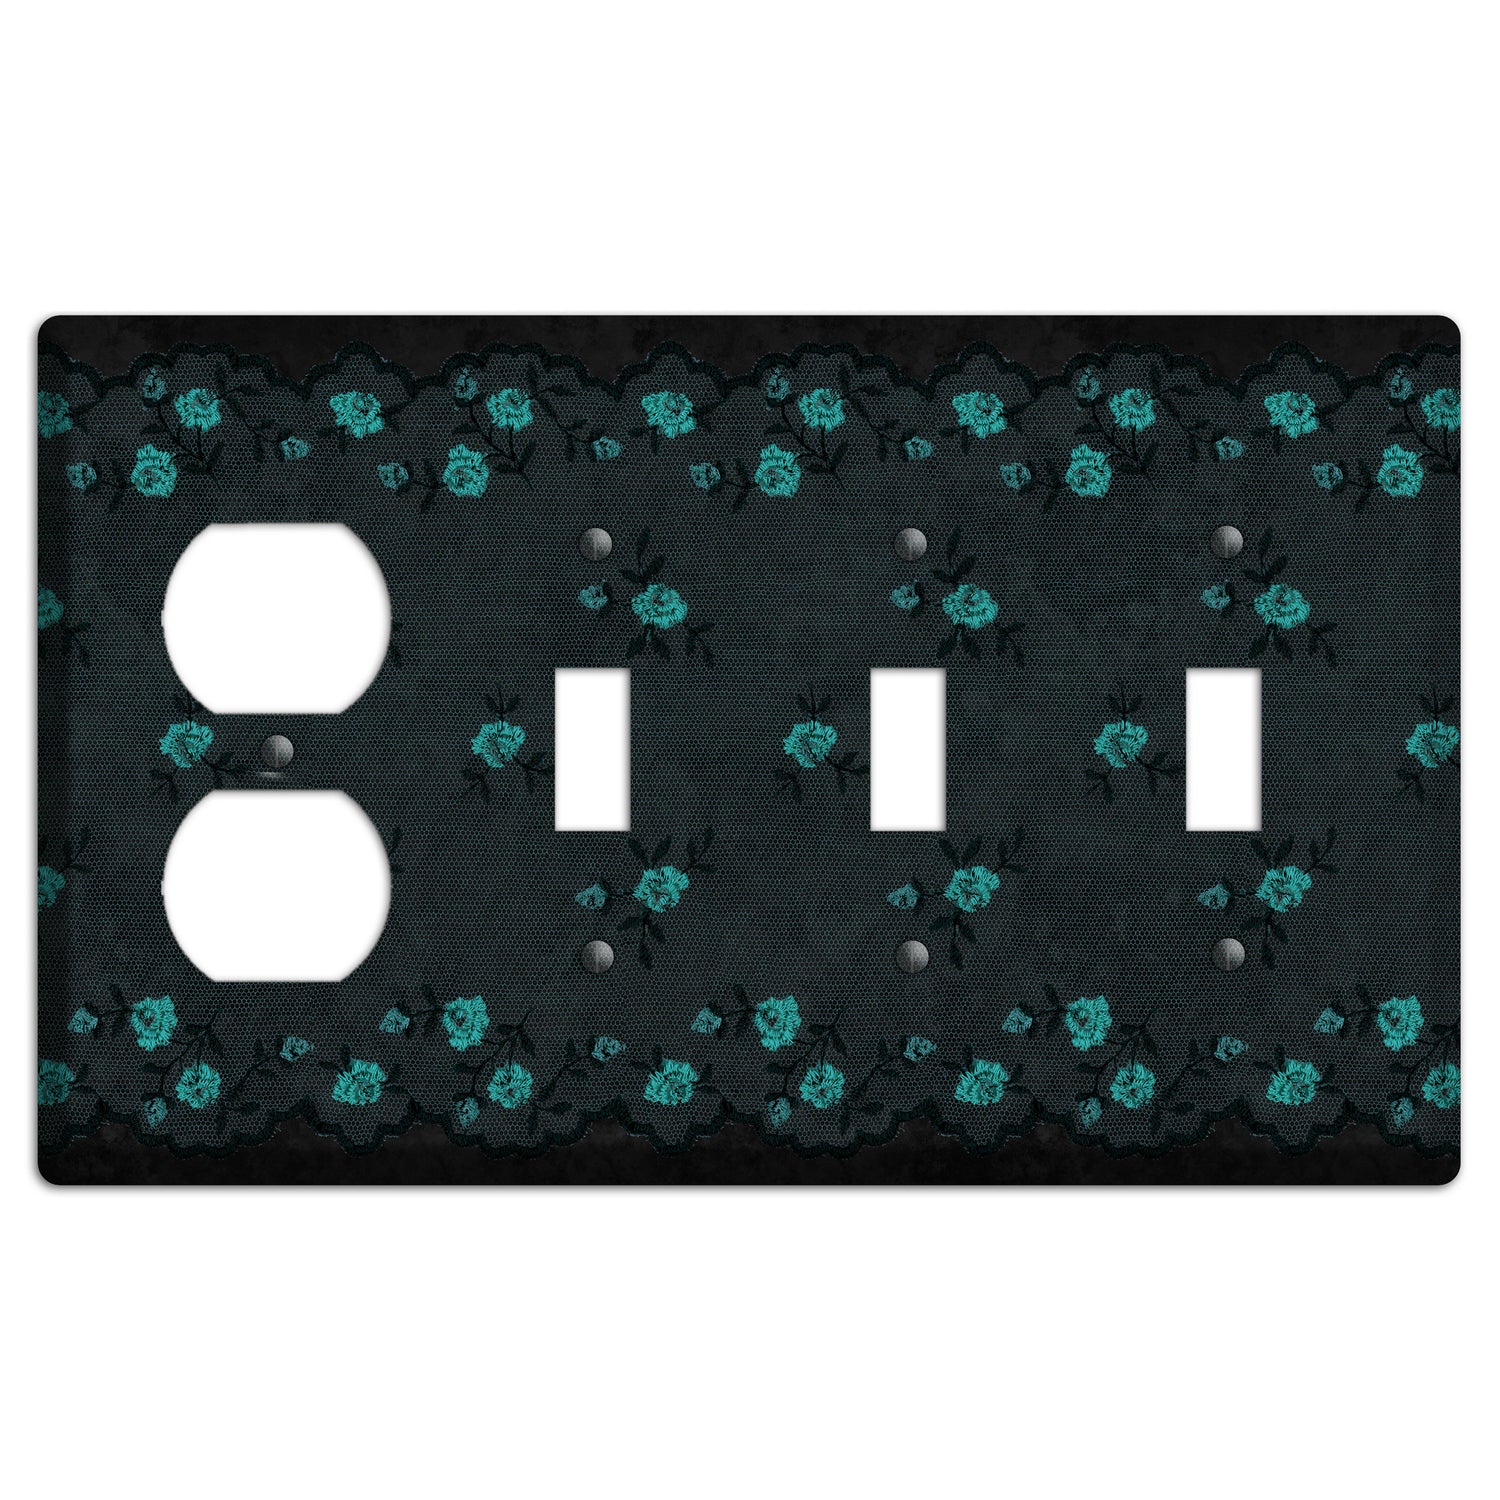 Embroidered Floral Black Duplex / 3 Toggle Wallplate